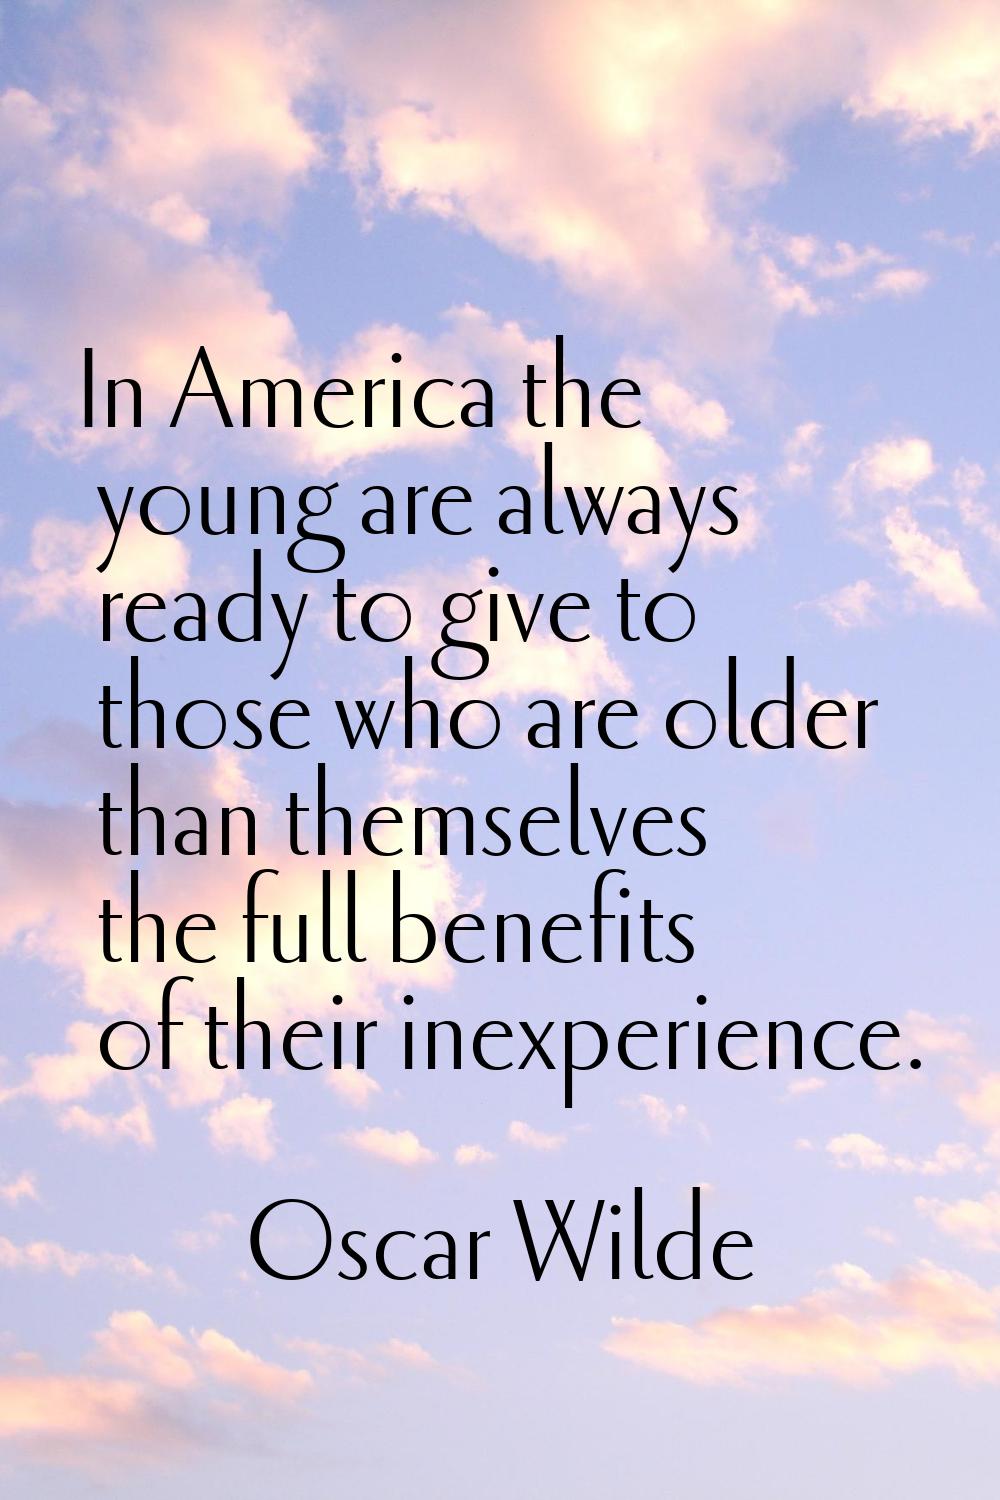 In America the young are always ready to give to those who are older than themselves the full benef